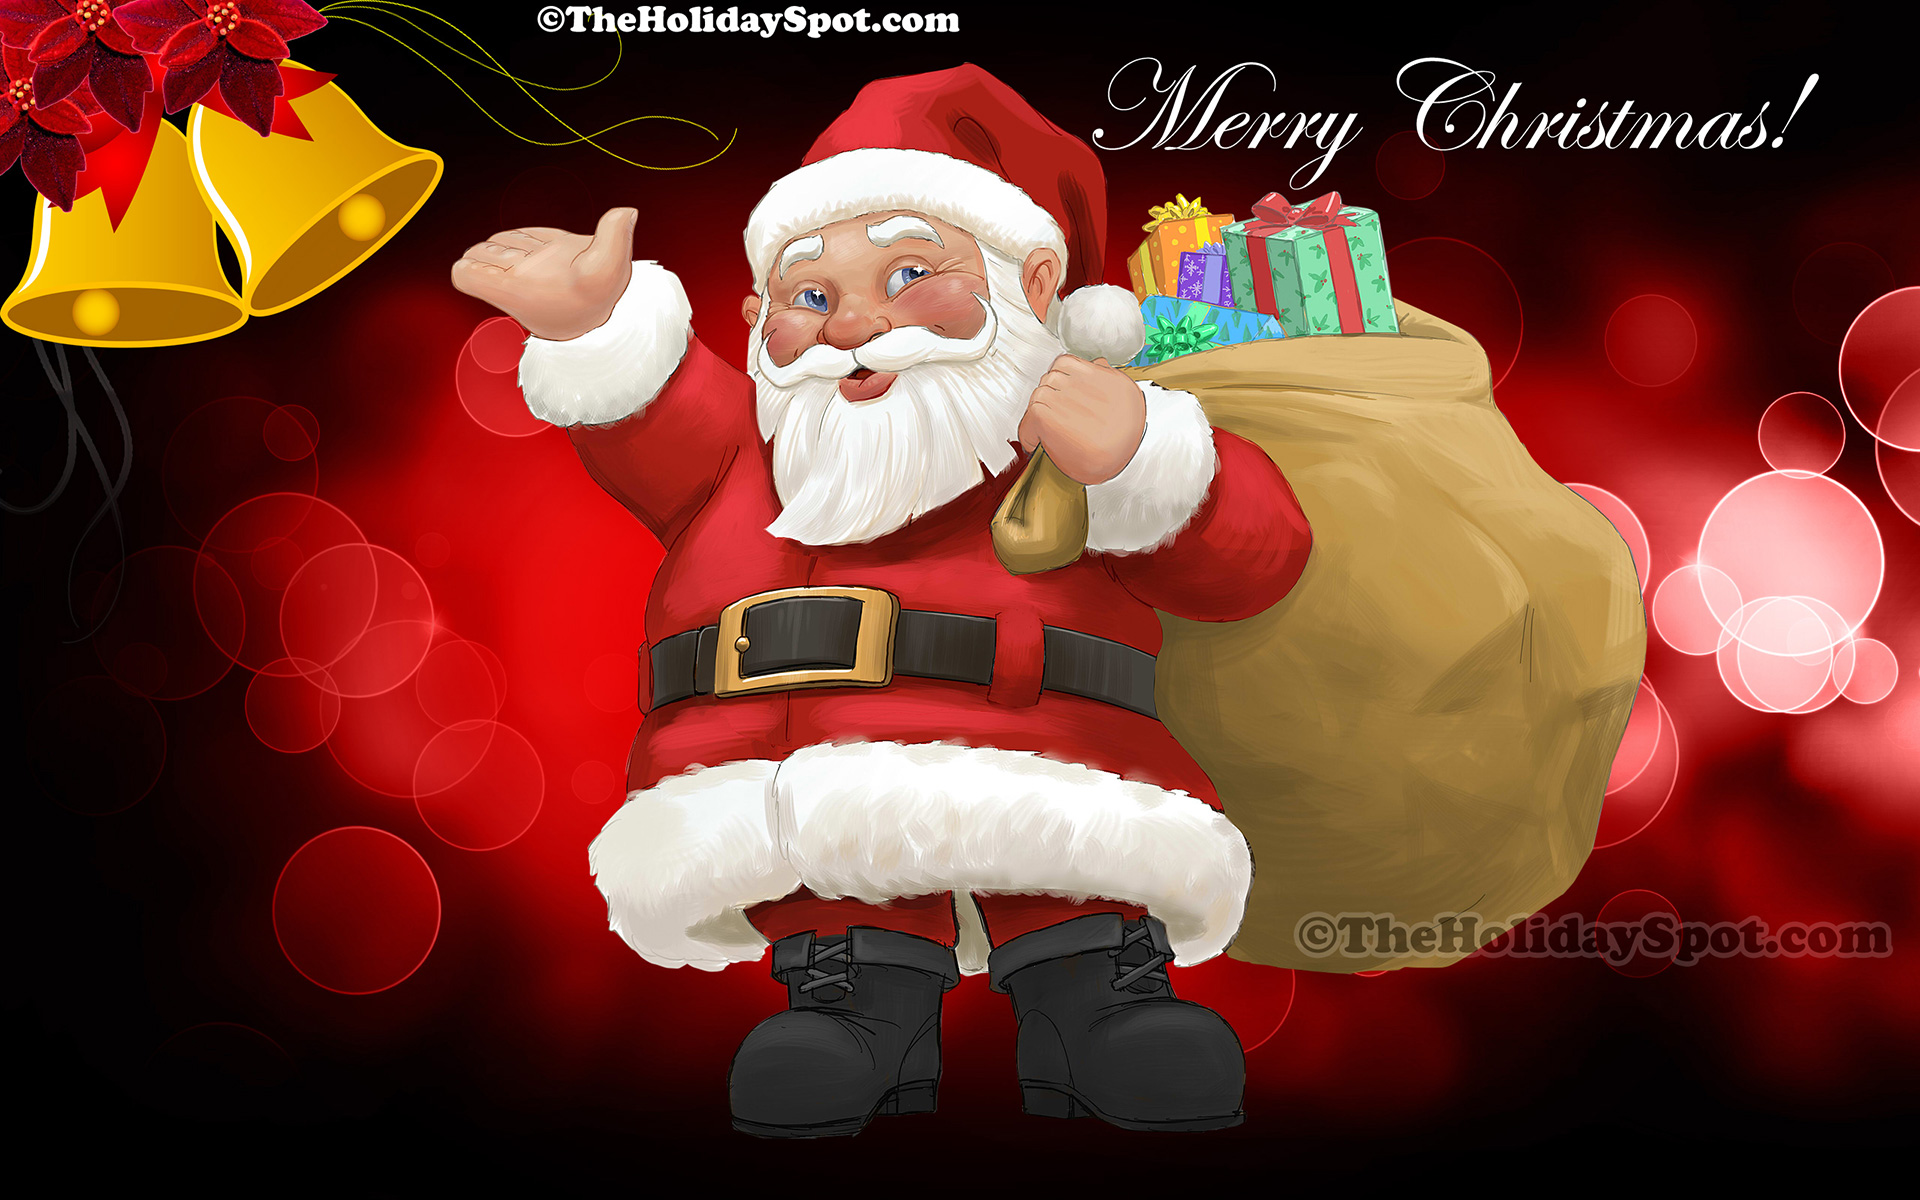 Christmas Wishes With Santa - HD Wallpaper 